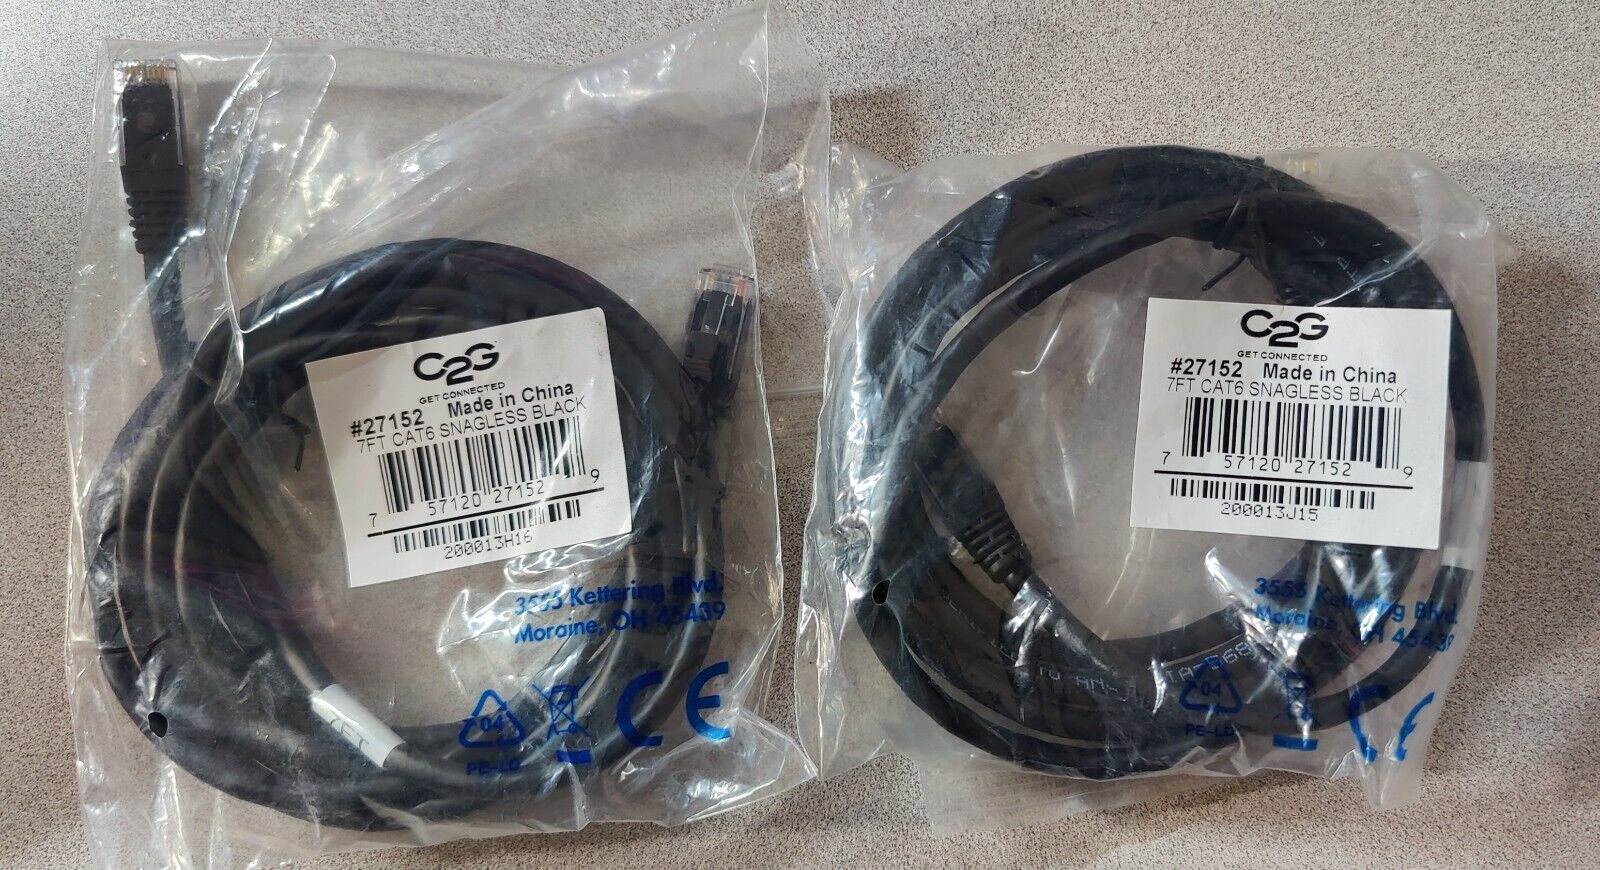 2 x Cables to Go 7' Cat6 RJ45 Network Cable, Snagless, Booted, Black, C2G #27152